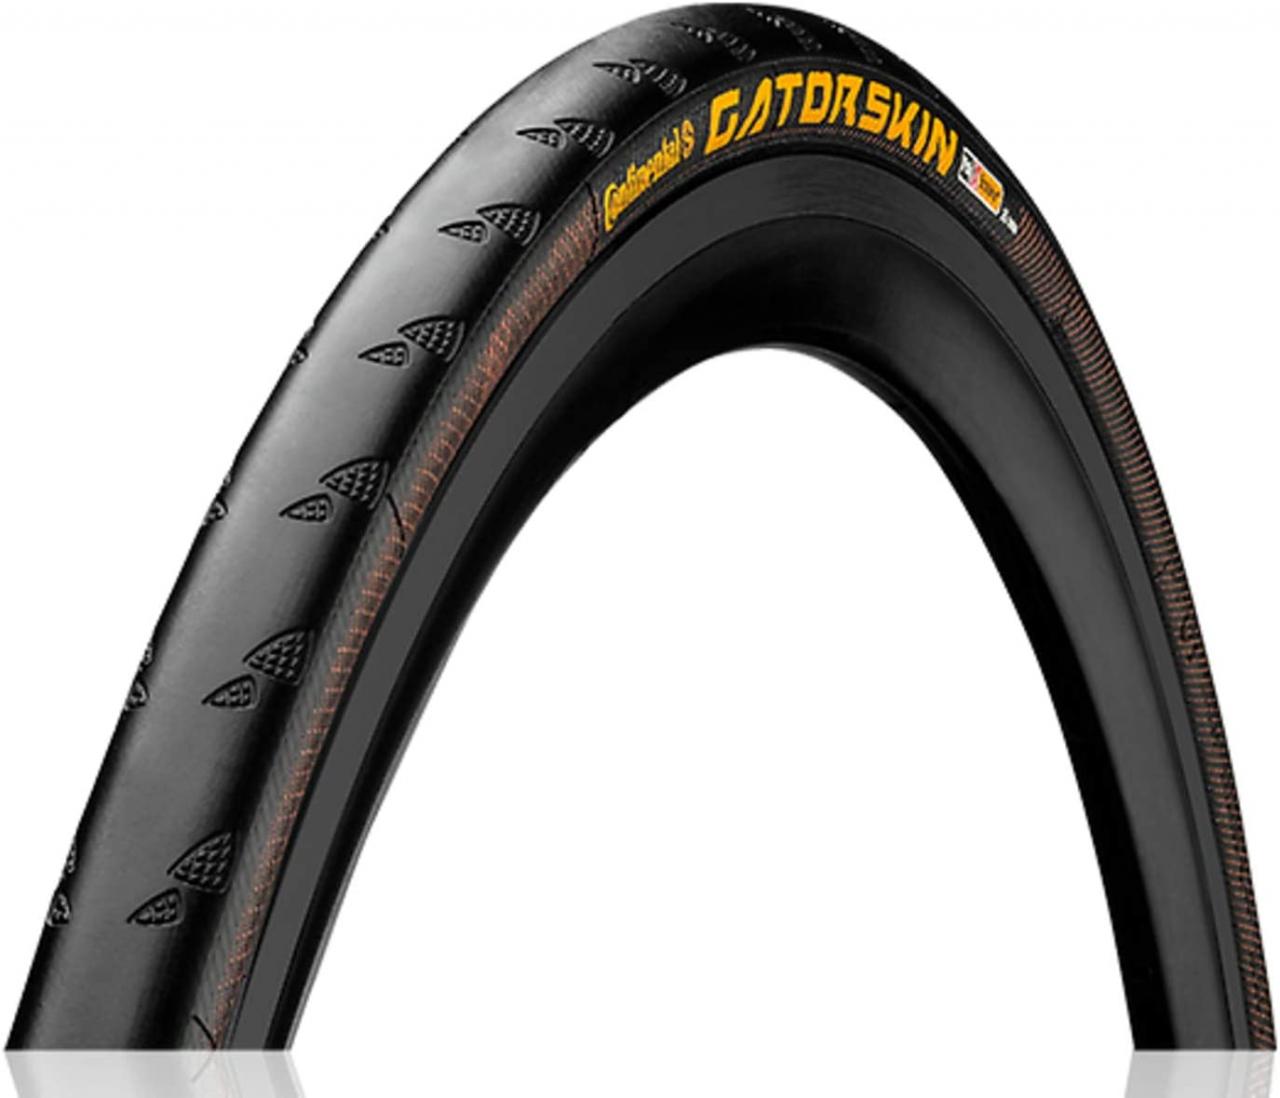 Continental Grand Prix 5000 Tubeless Tires Review | Best Road Bike Wheels |  Irwin Cycling